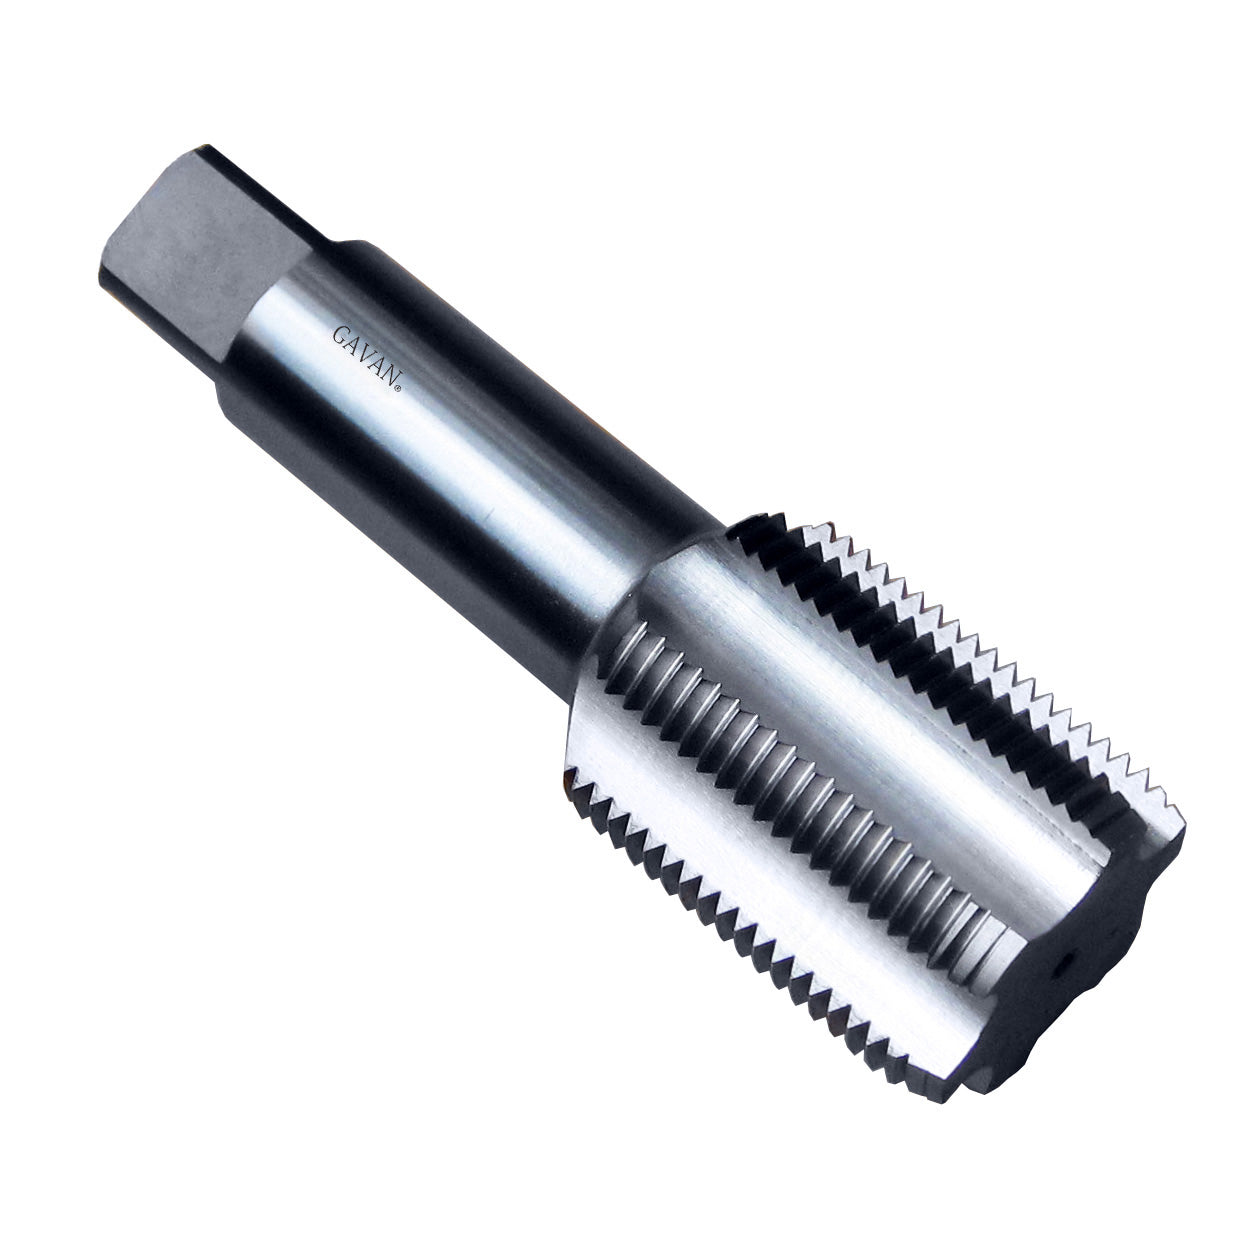 1 7/8" - 18 HSS Unified Right Hand Thread Tap